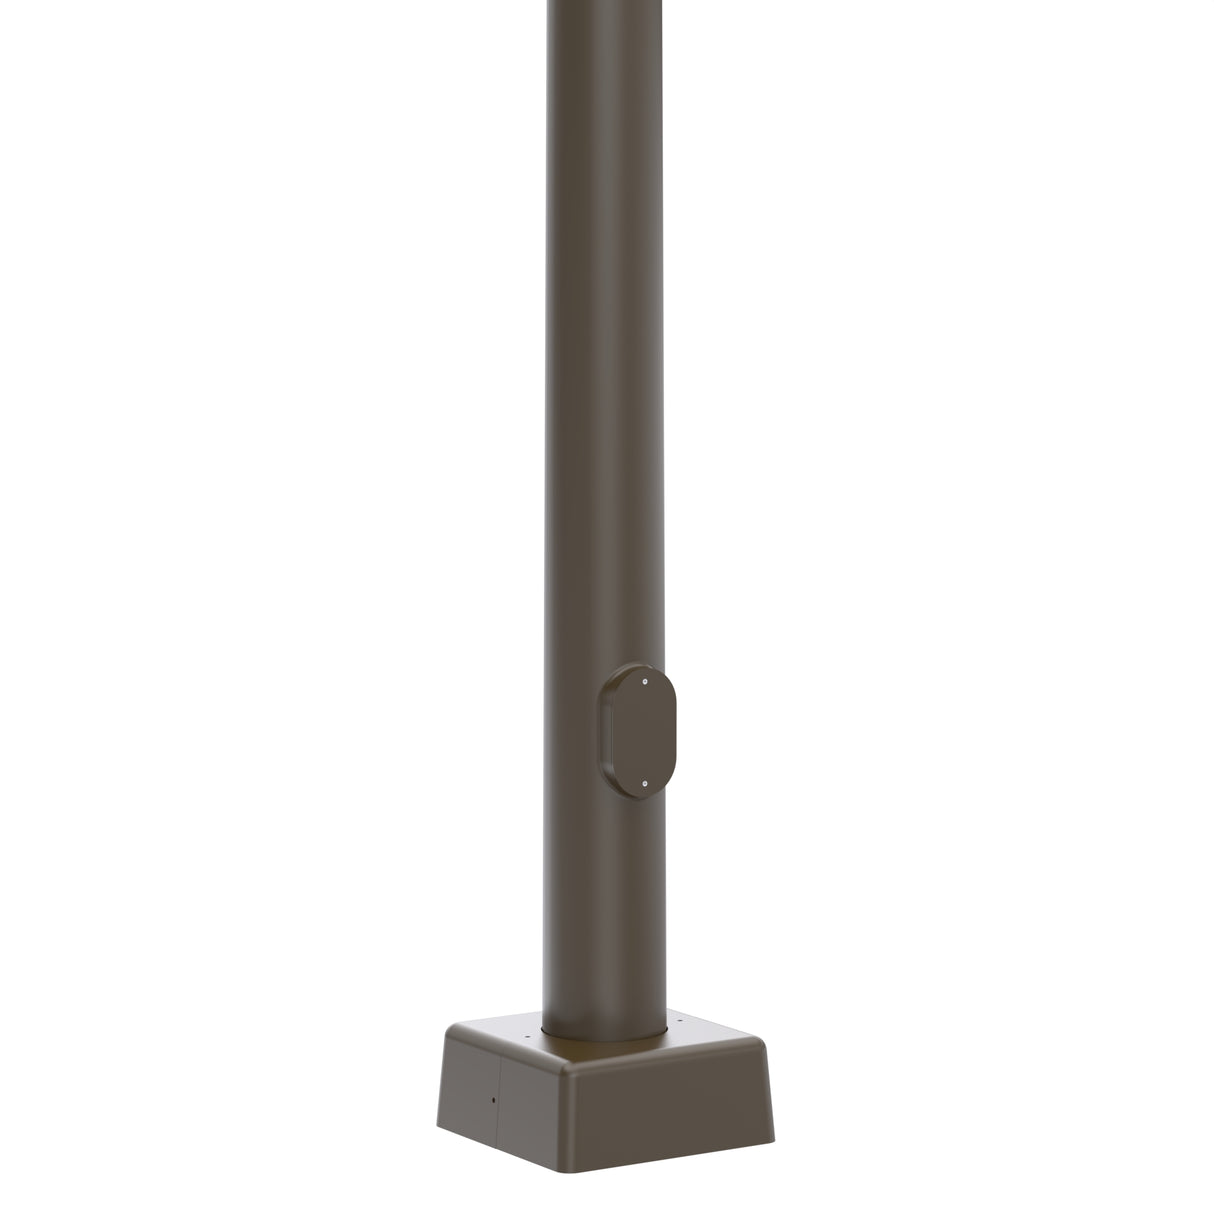 70' Tall x 13" Base OD x 3.6" Top OD x 7 & 7ga Thick, Round Tapered Steel, Anchor Base Light Pole